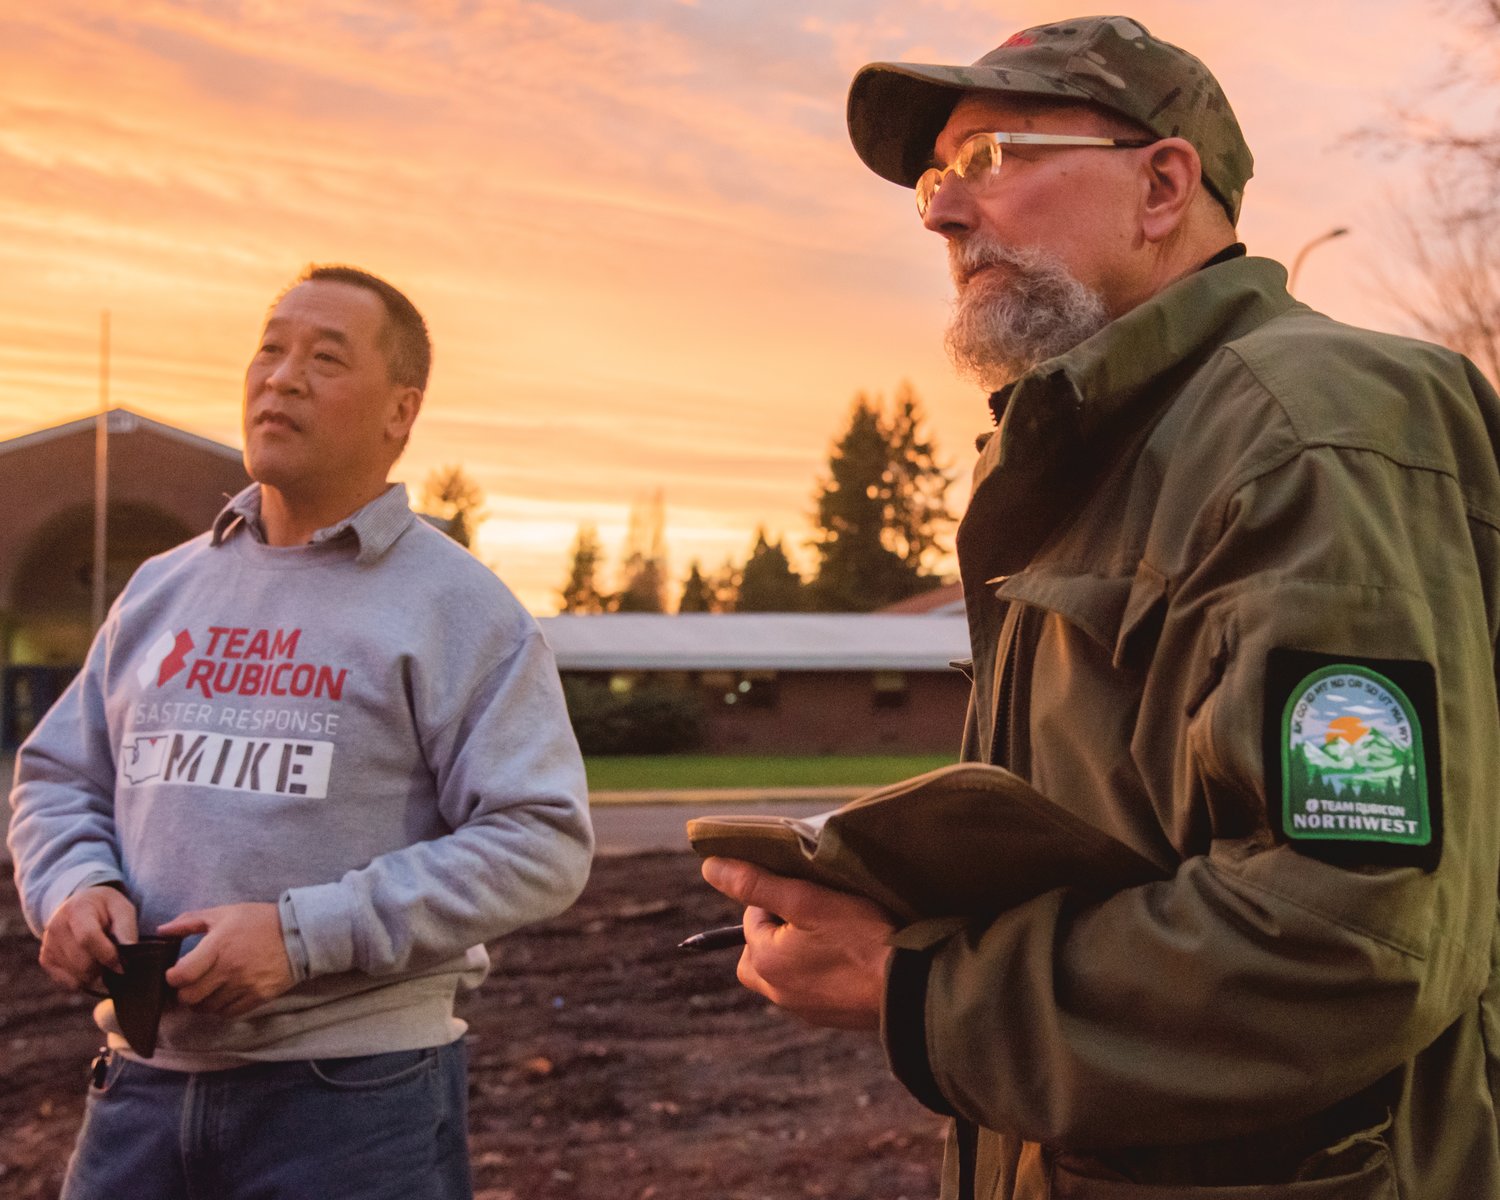 Michael Chiu and Karl Kaiyala, with Team Rubicon, talk about disaster response after flooding in Centralia on Wednesday.